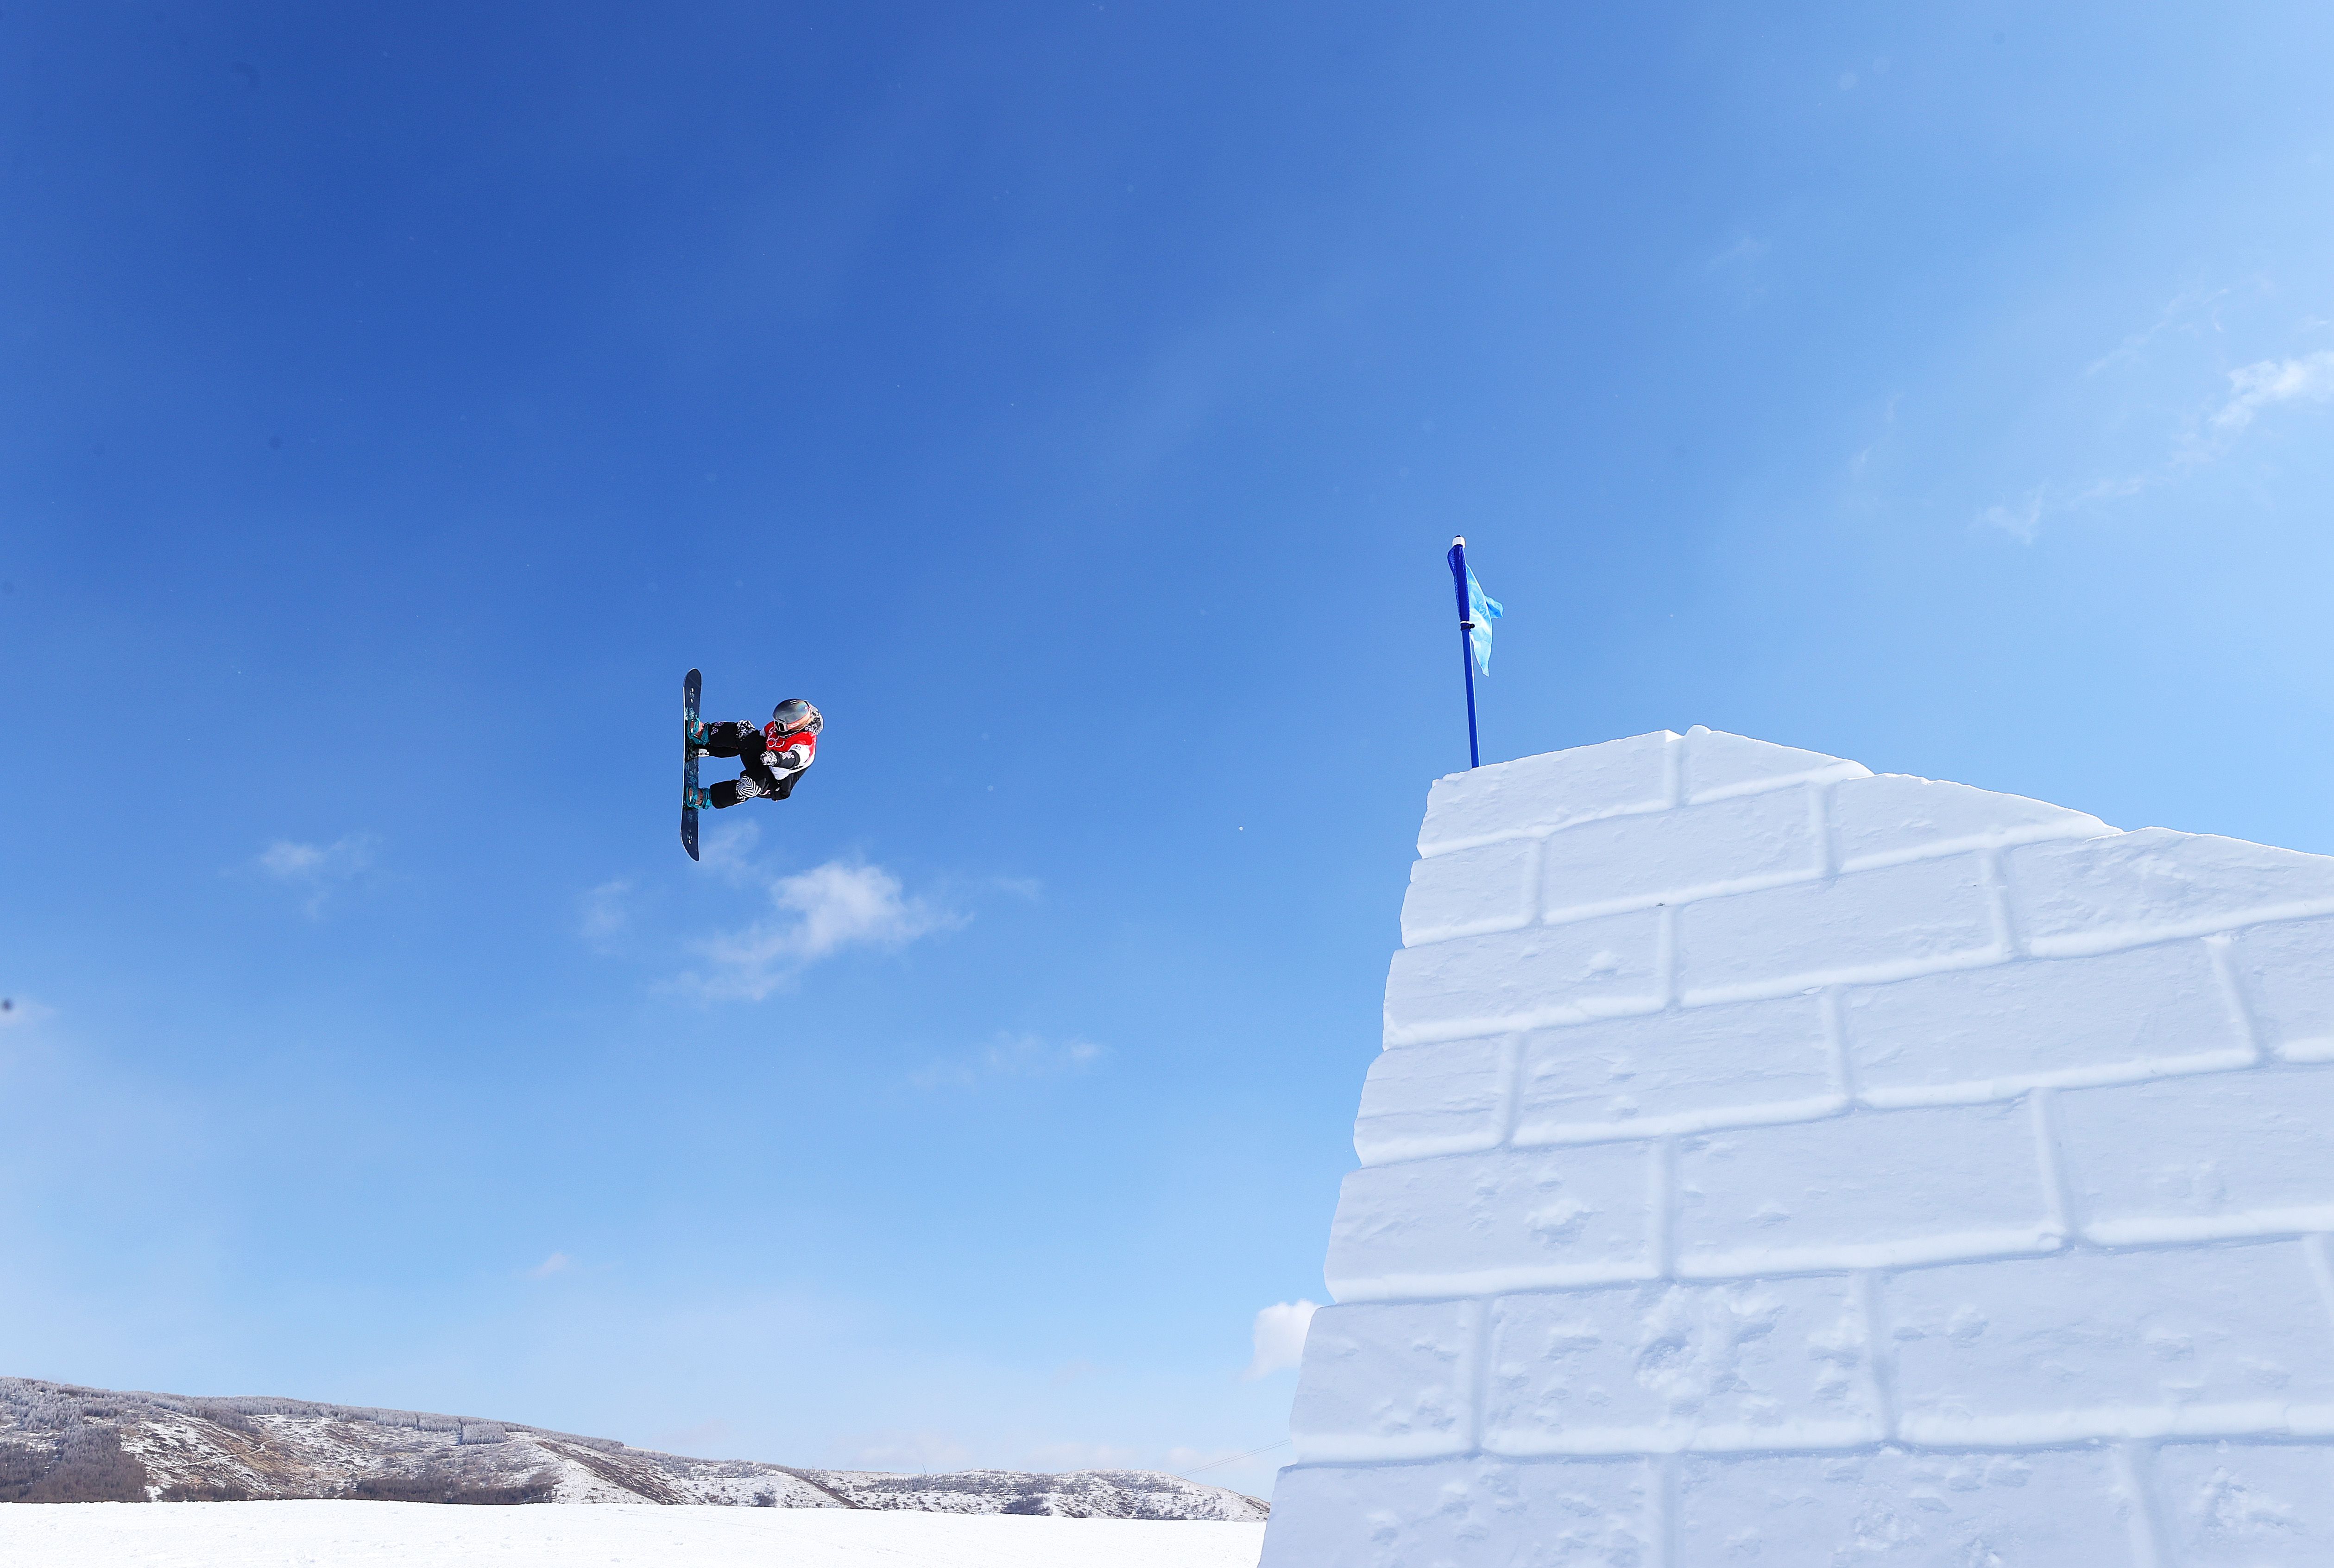 Jamie Anderson of Team USA performs a trick during the Snowboard Slopestyle Training session ahead of the Winter Olympic Games at the Genting Snow Park on February 04, 2022 in Zhangjiakou, China. 